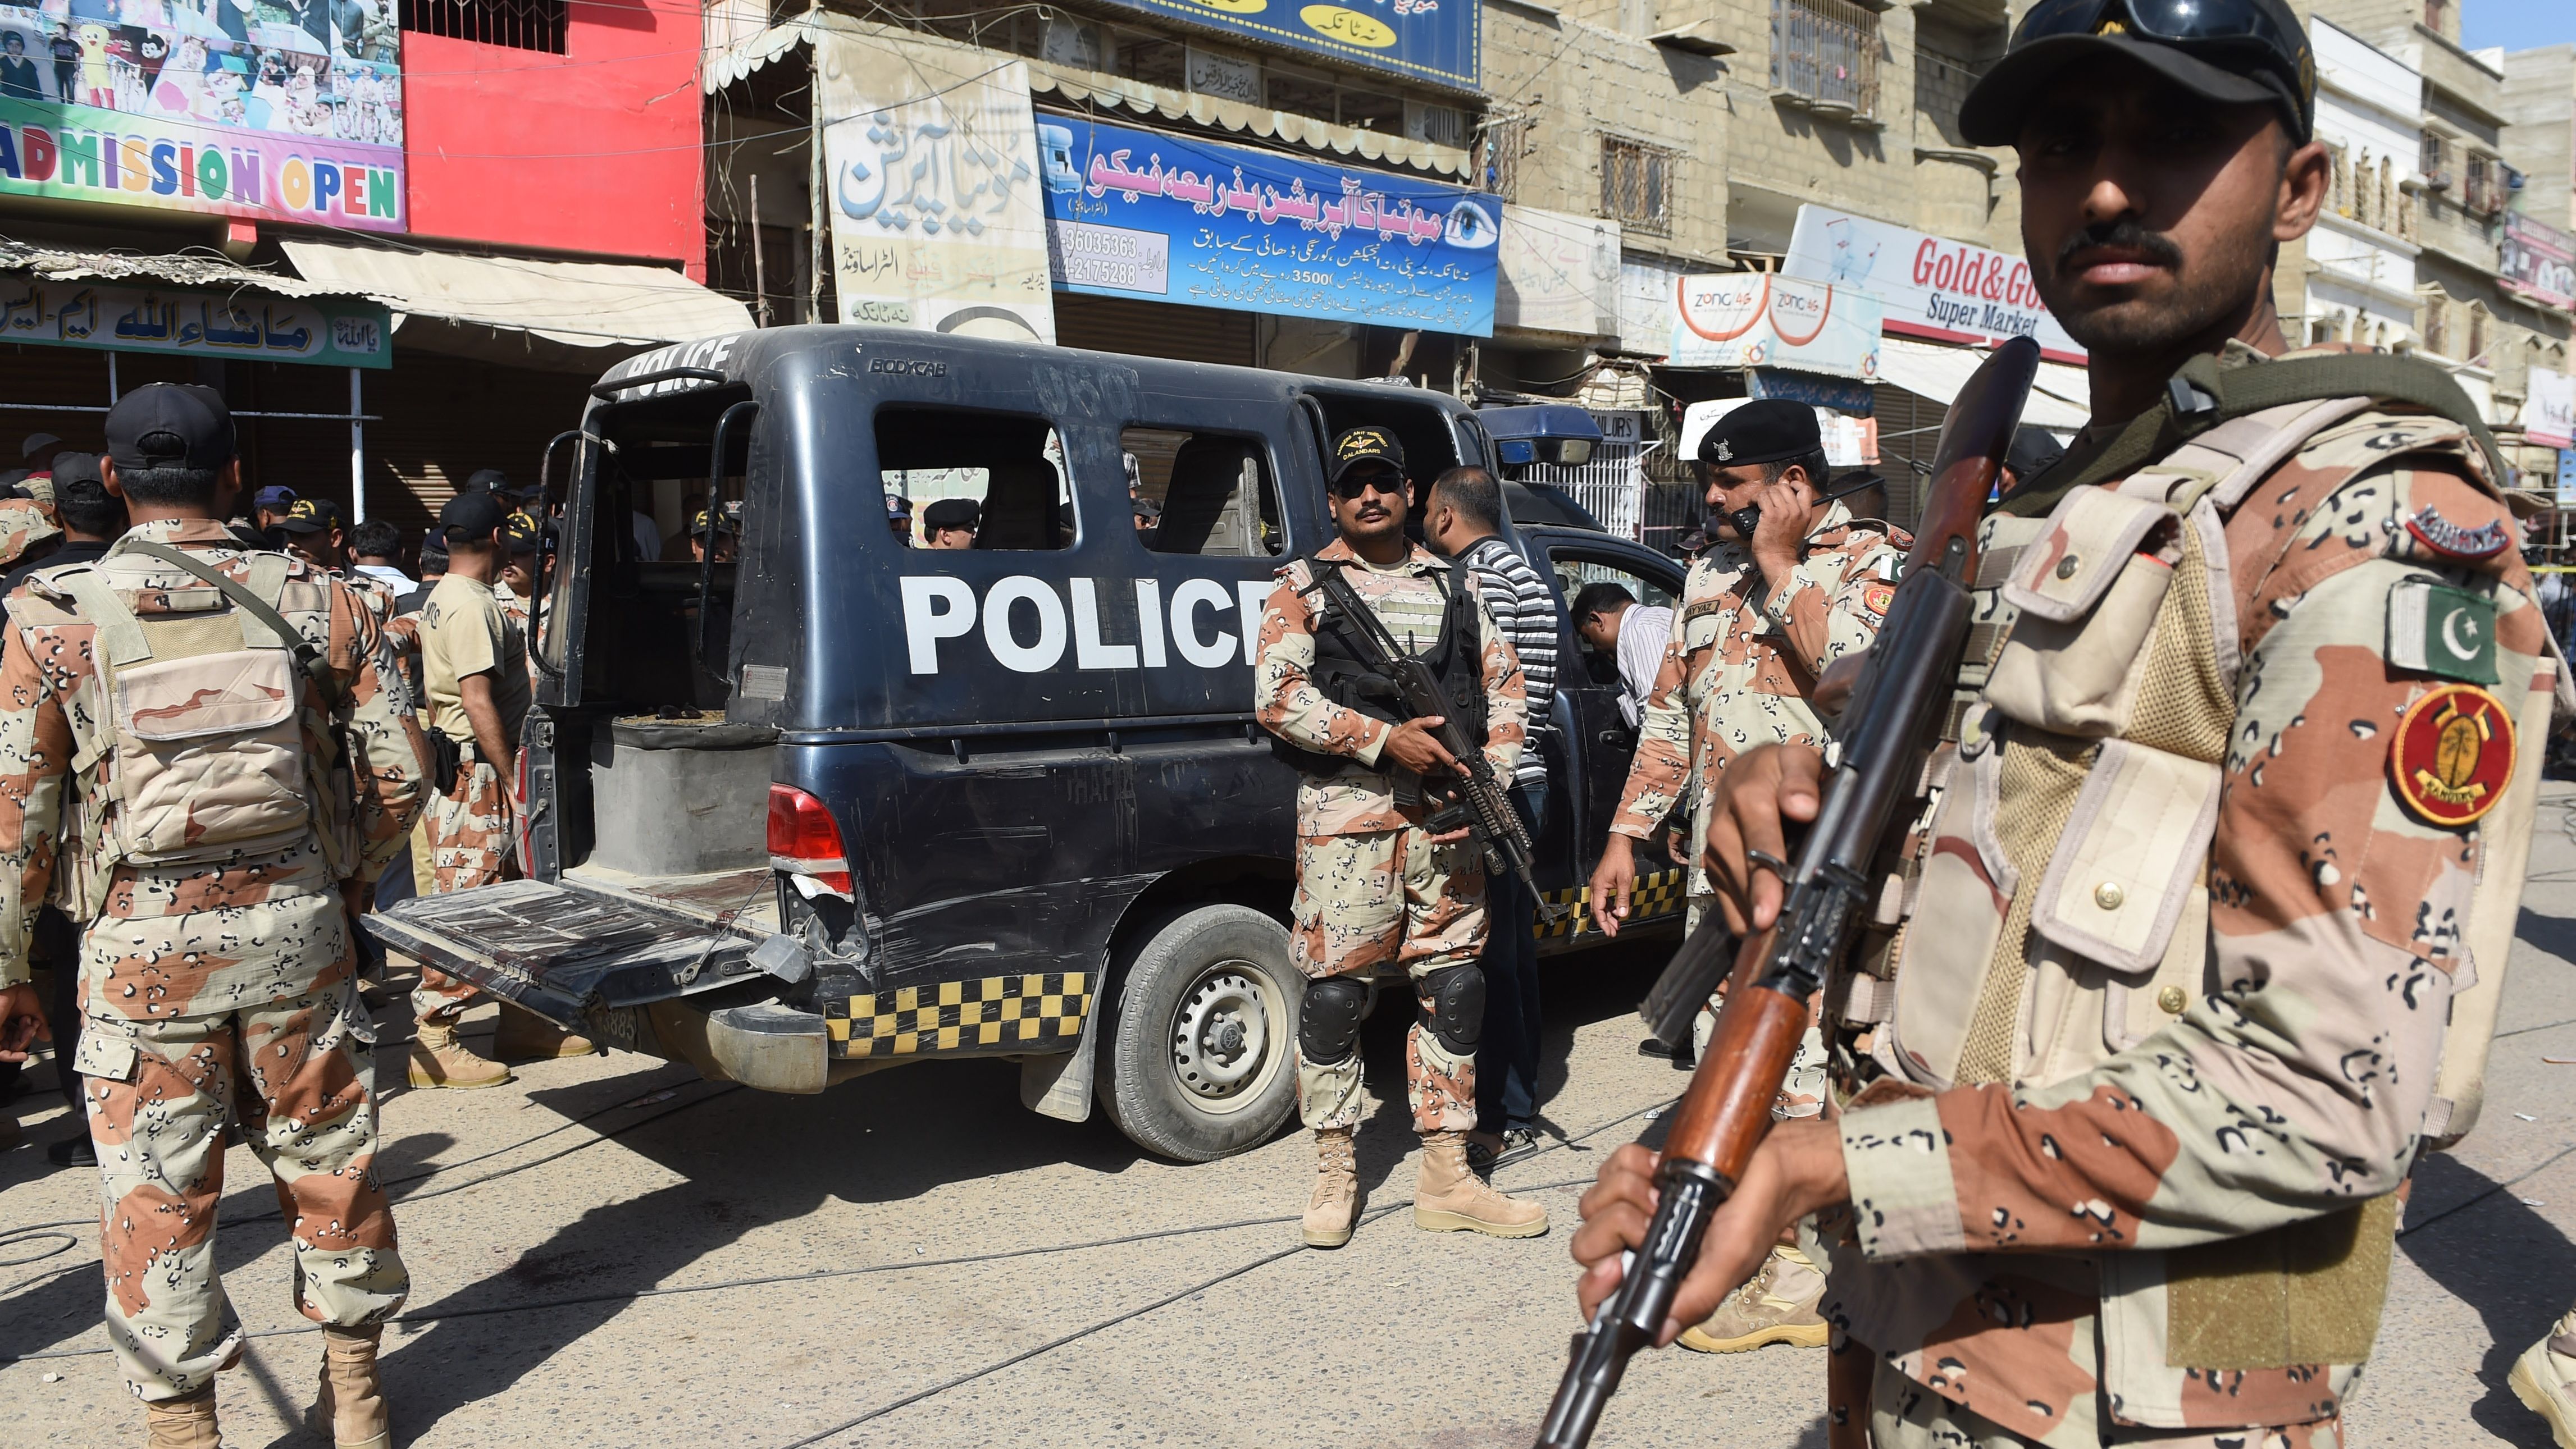 Pakistani security personnel gather around a police van after an attack by gunmen on security members guarding a polio vaccination team in Karachi on April 20, 2016.